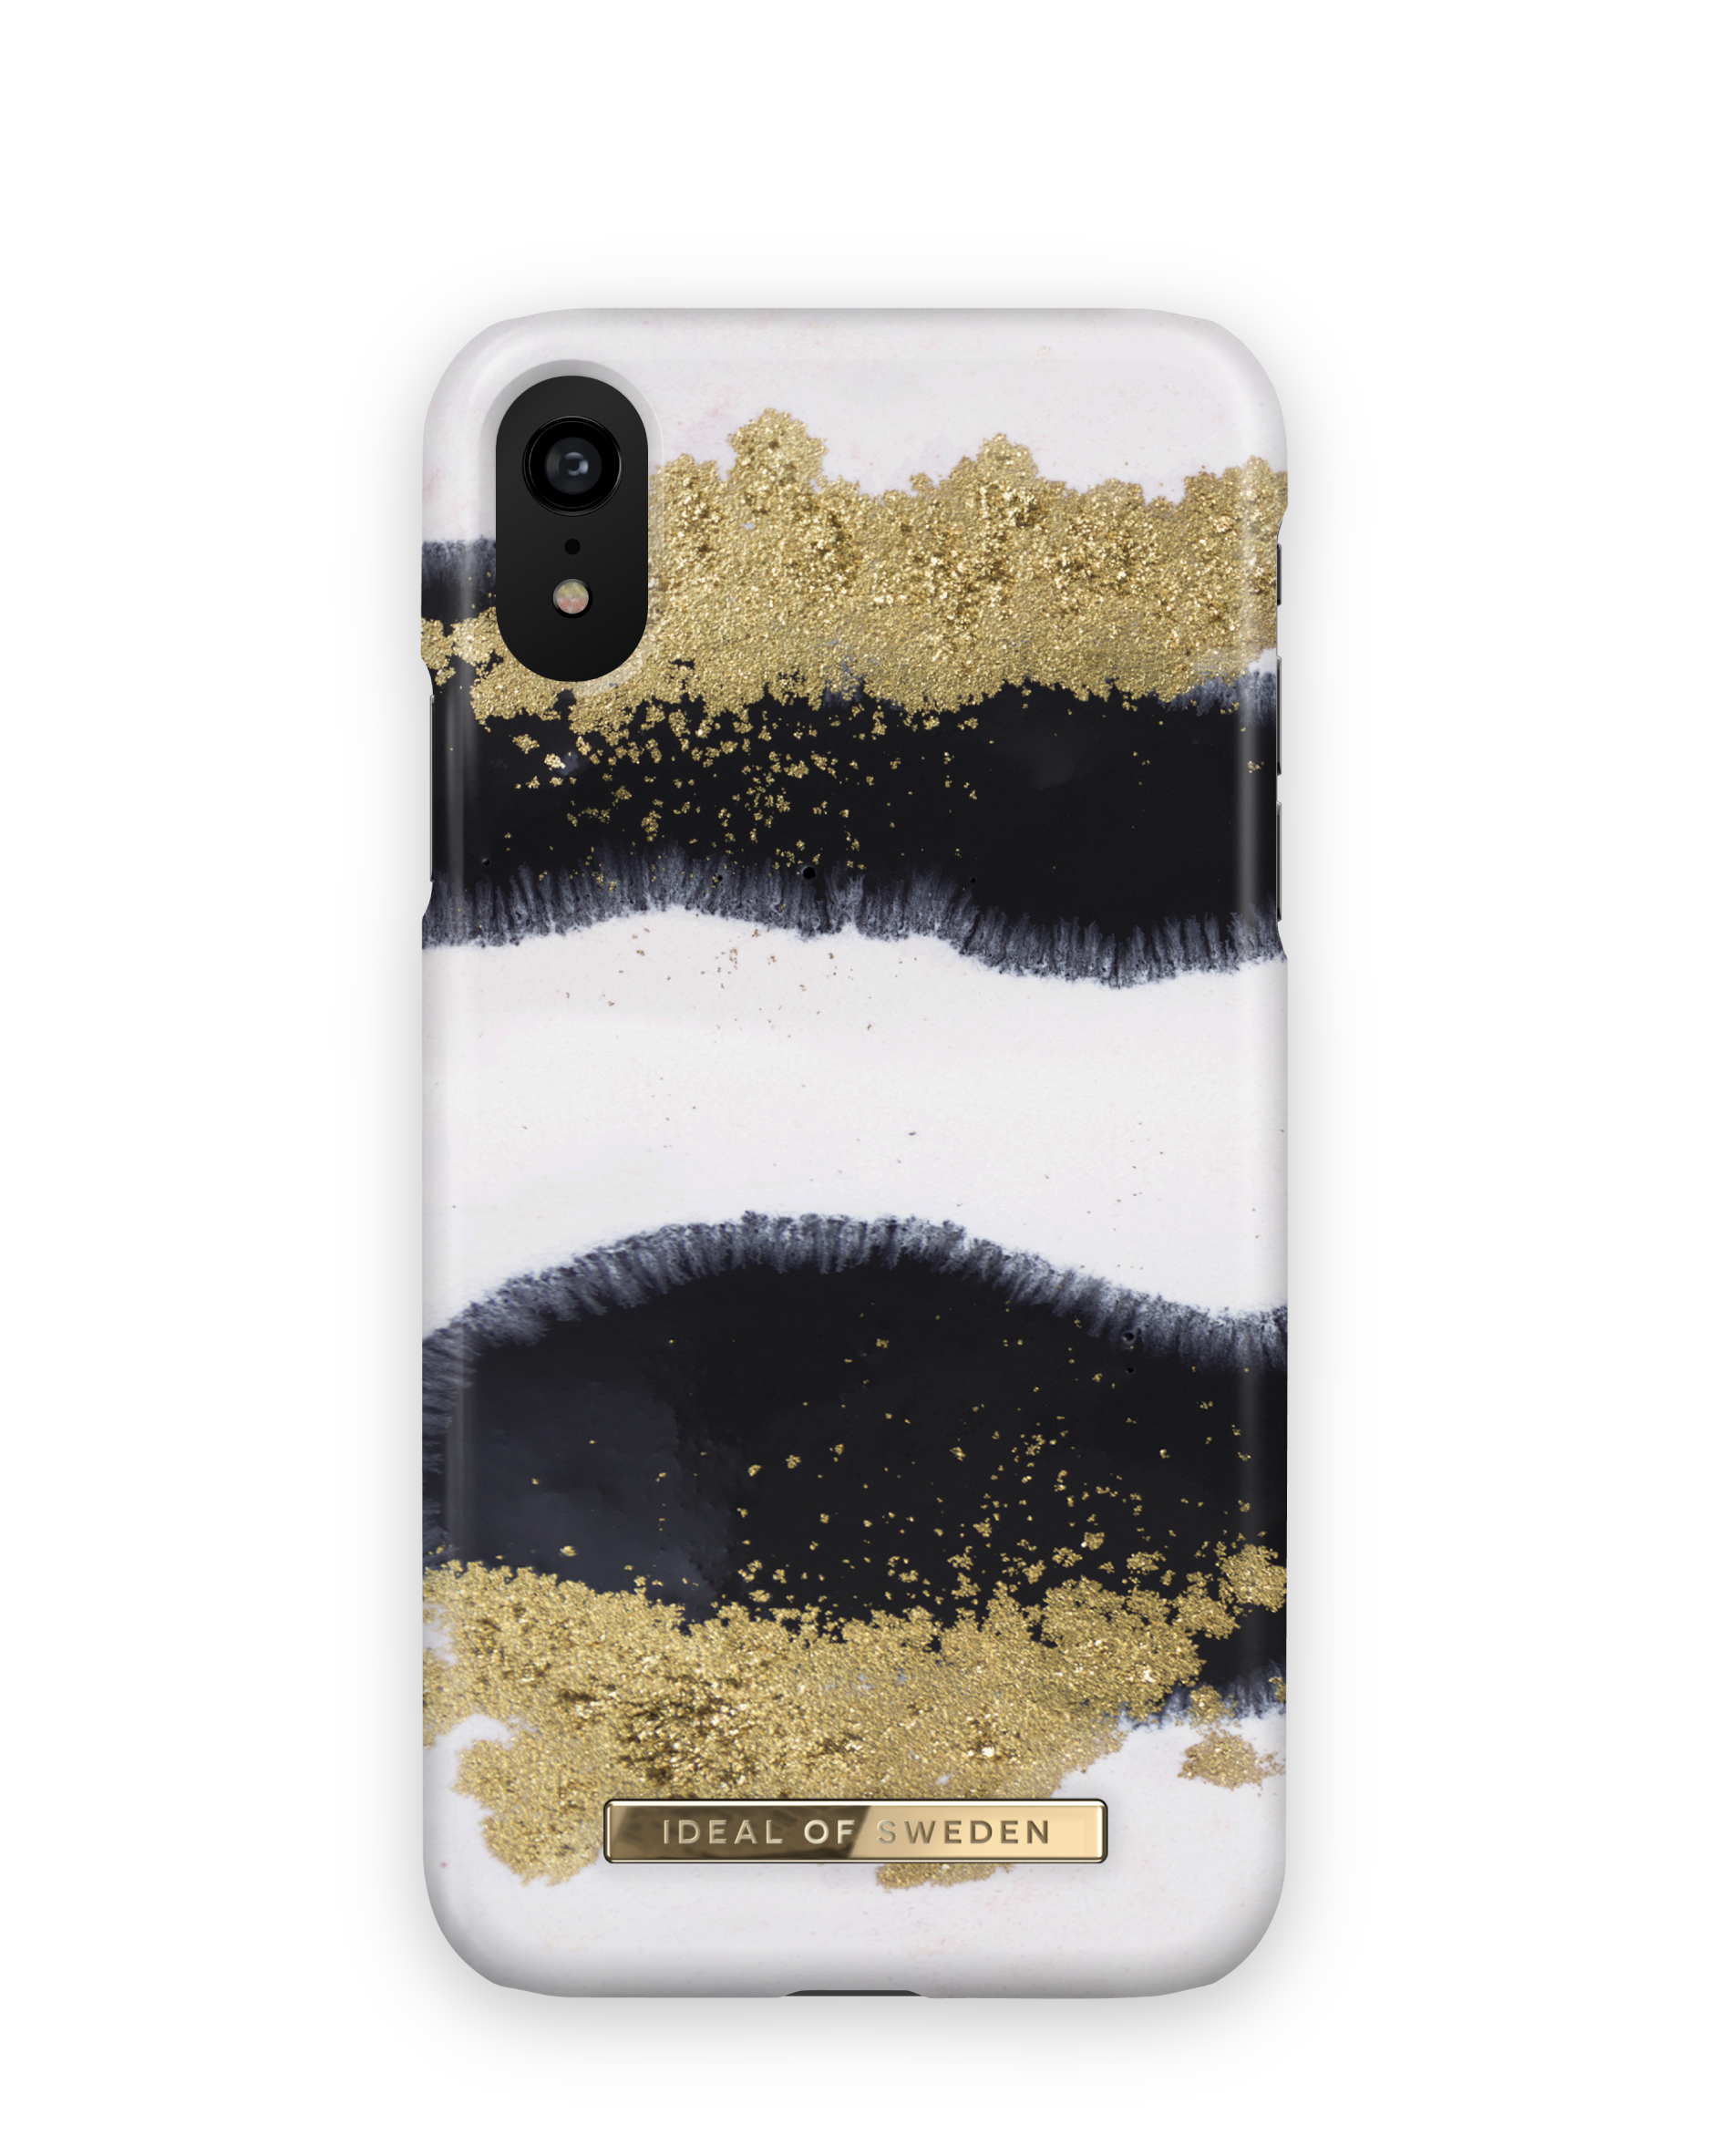 IDEAL OF Gleaming Apple, SWEDEN 11, Apple XR, Apple IDFCSS19-I1961-122, Licorice iPhone iPhone Backcover